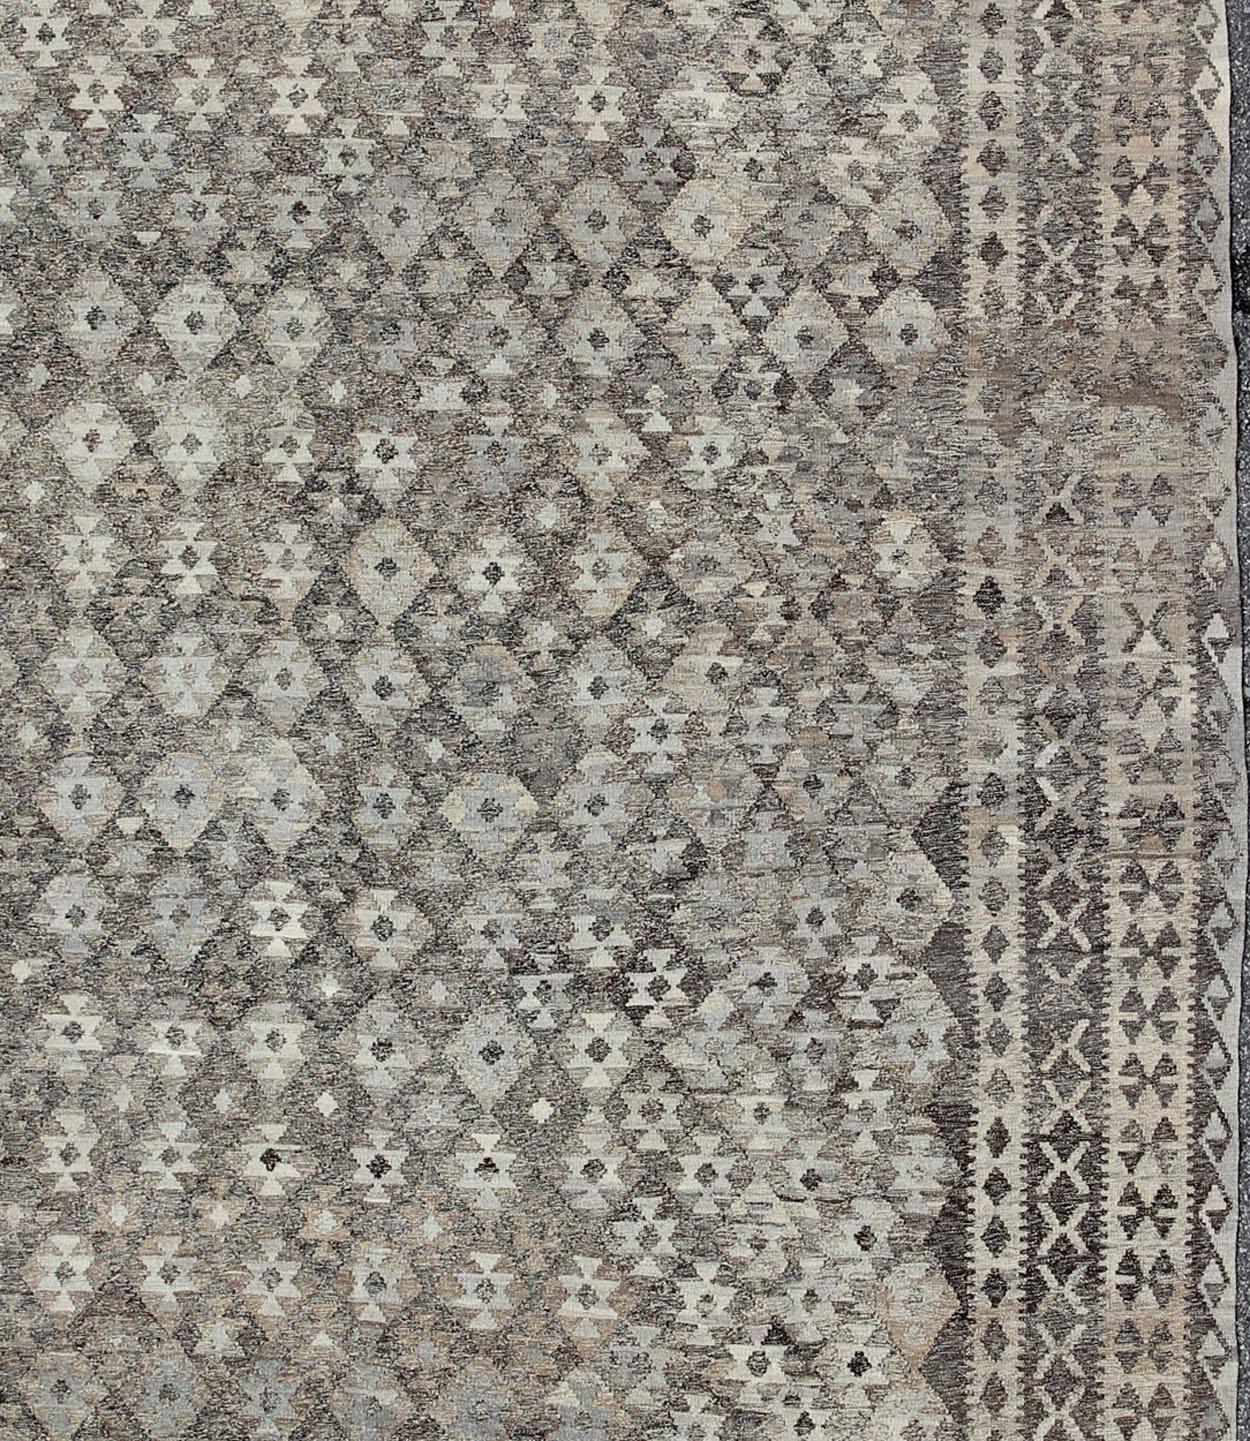 Versatile and natural color-tone flat-weave Kilim for a Modern or Classic design
Flat-weave Kilim rug with natural tones, rug ABT-8120832, country of origin / type: Afghanistan / Kilim

This silver-grey colored piece features a design that evokes